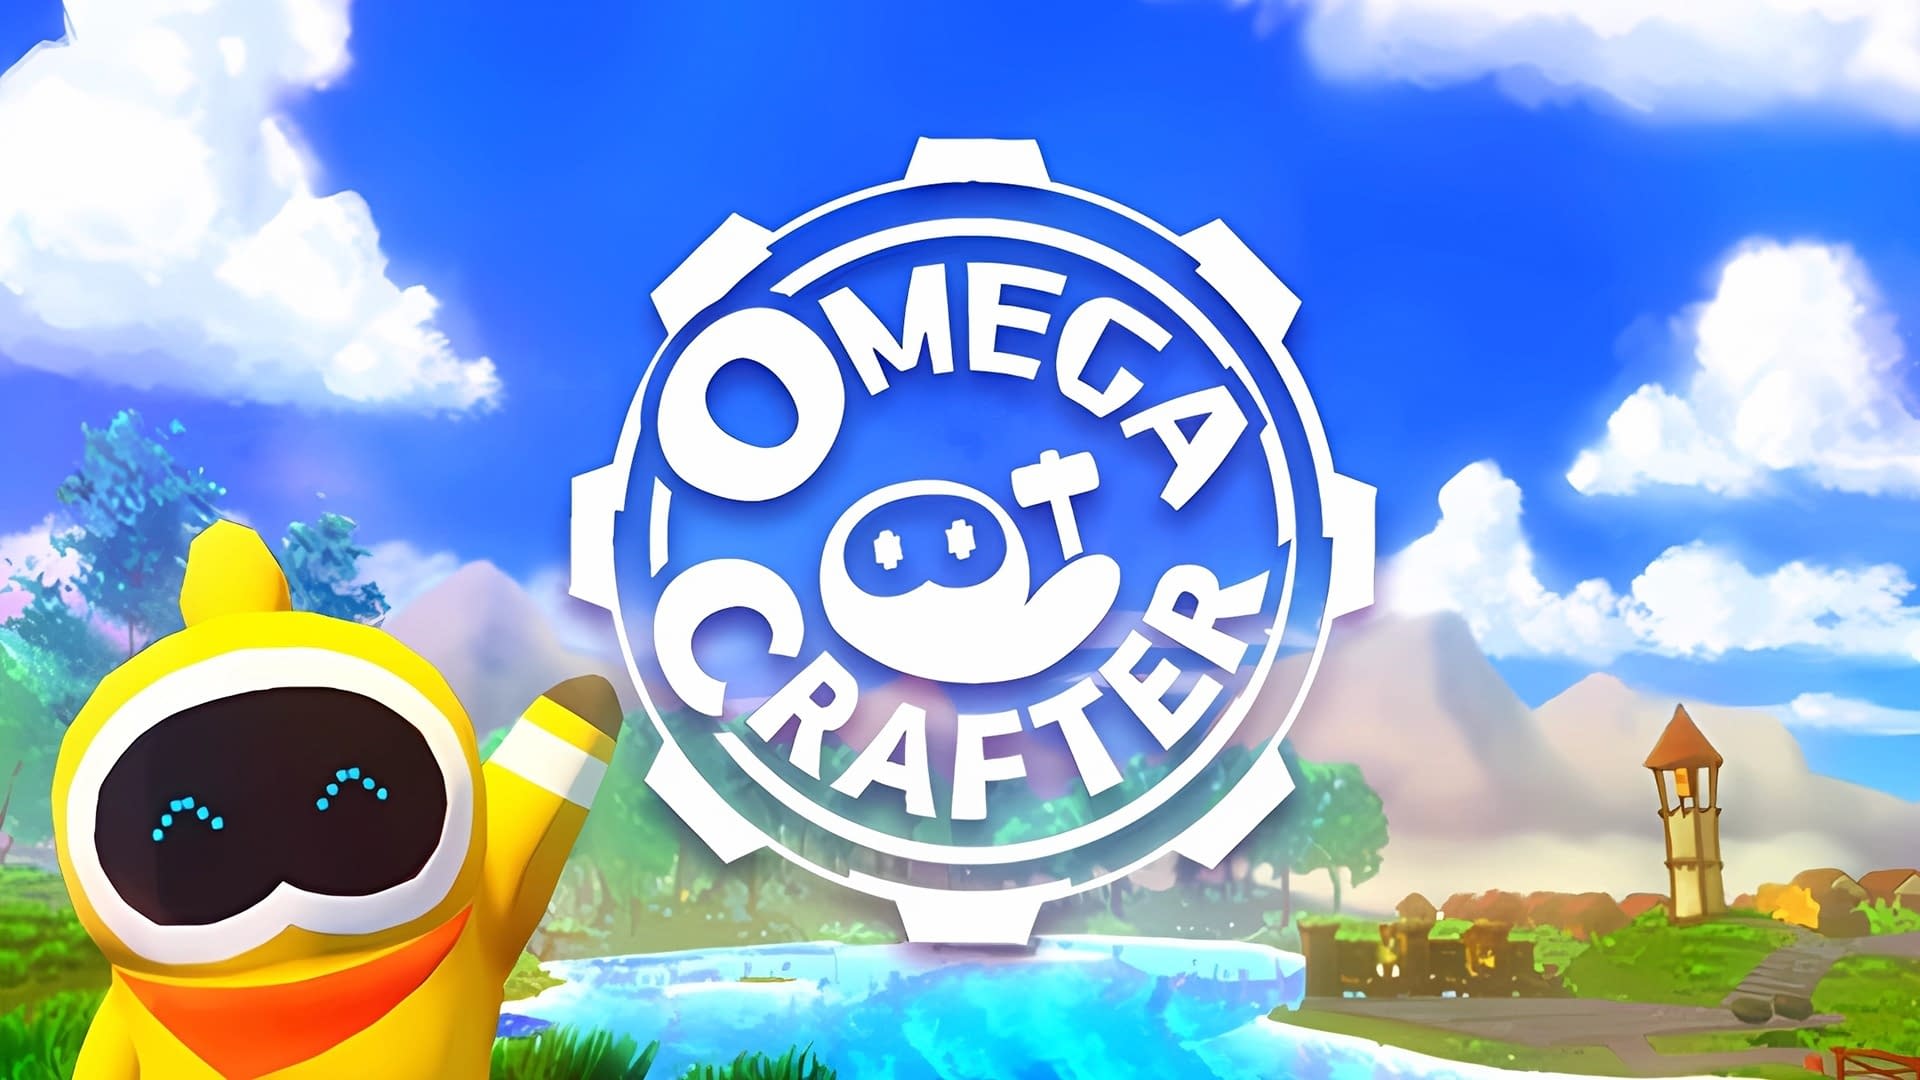 Omega Crafter Released Date Announced